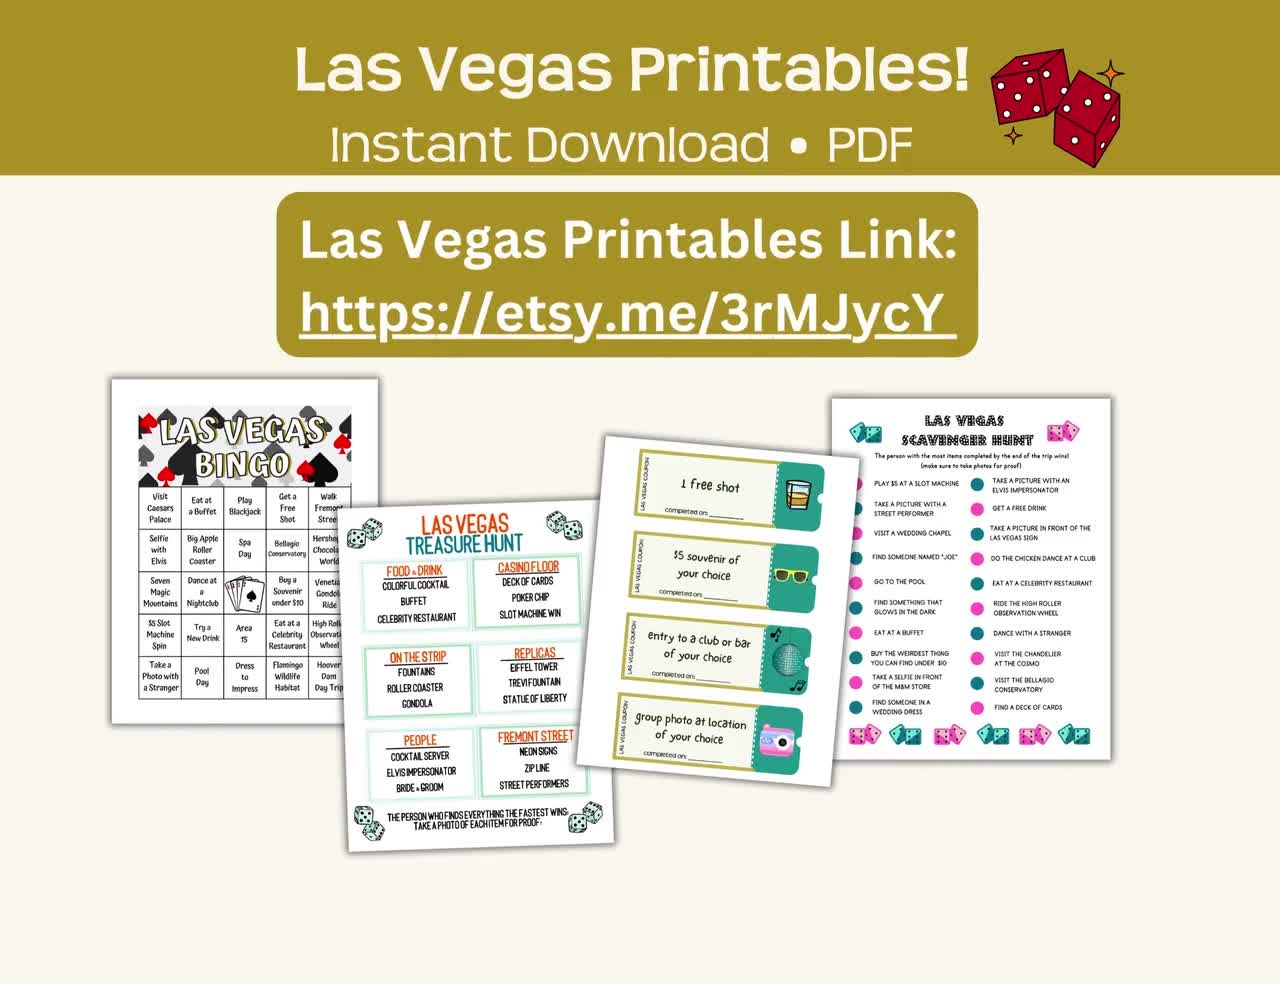 Printable Las Vegas Coupons Pink Purple Fun And Affordable Gift Instant Pdf Download Great For Bachelorette Parties And More Etsy - Free Las Vegas Buffet Coupons Printable